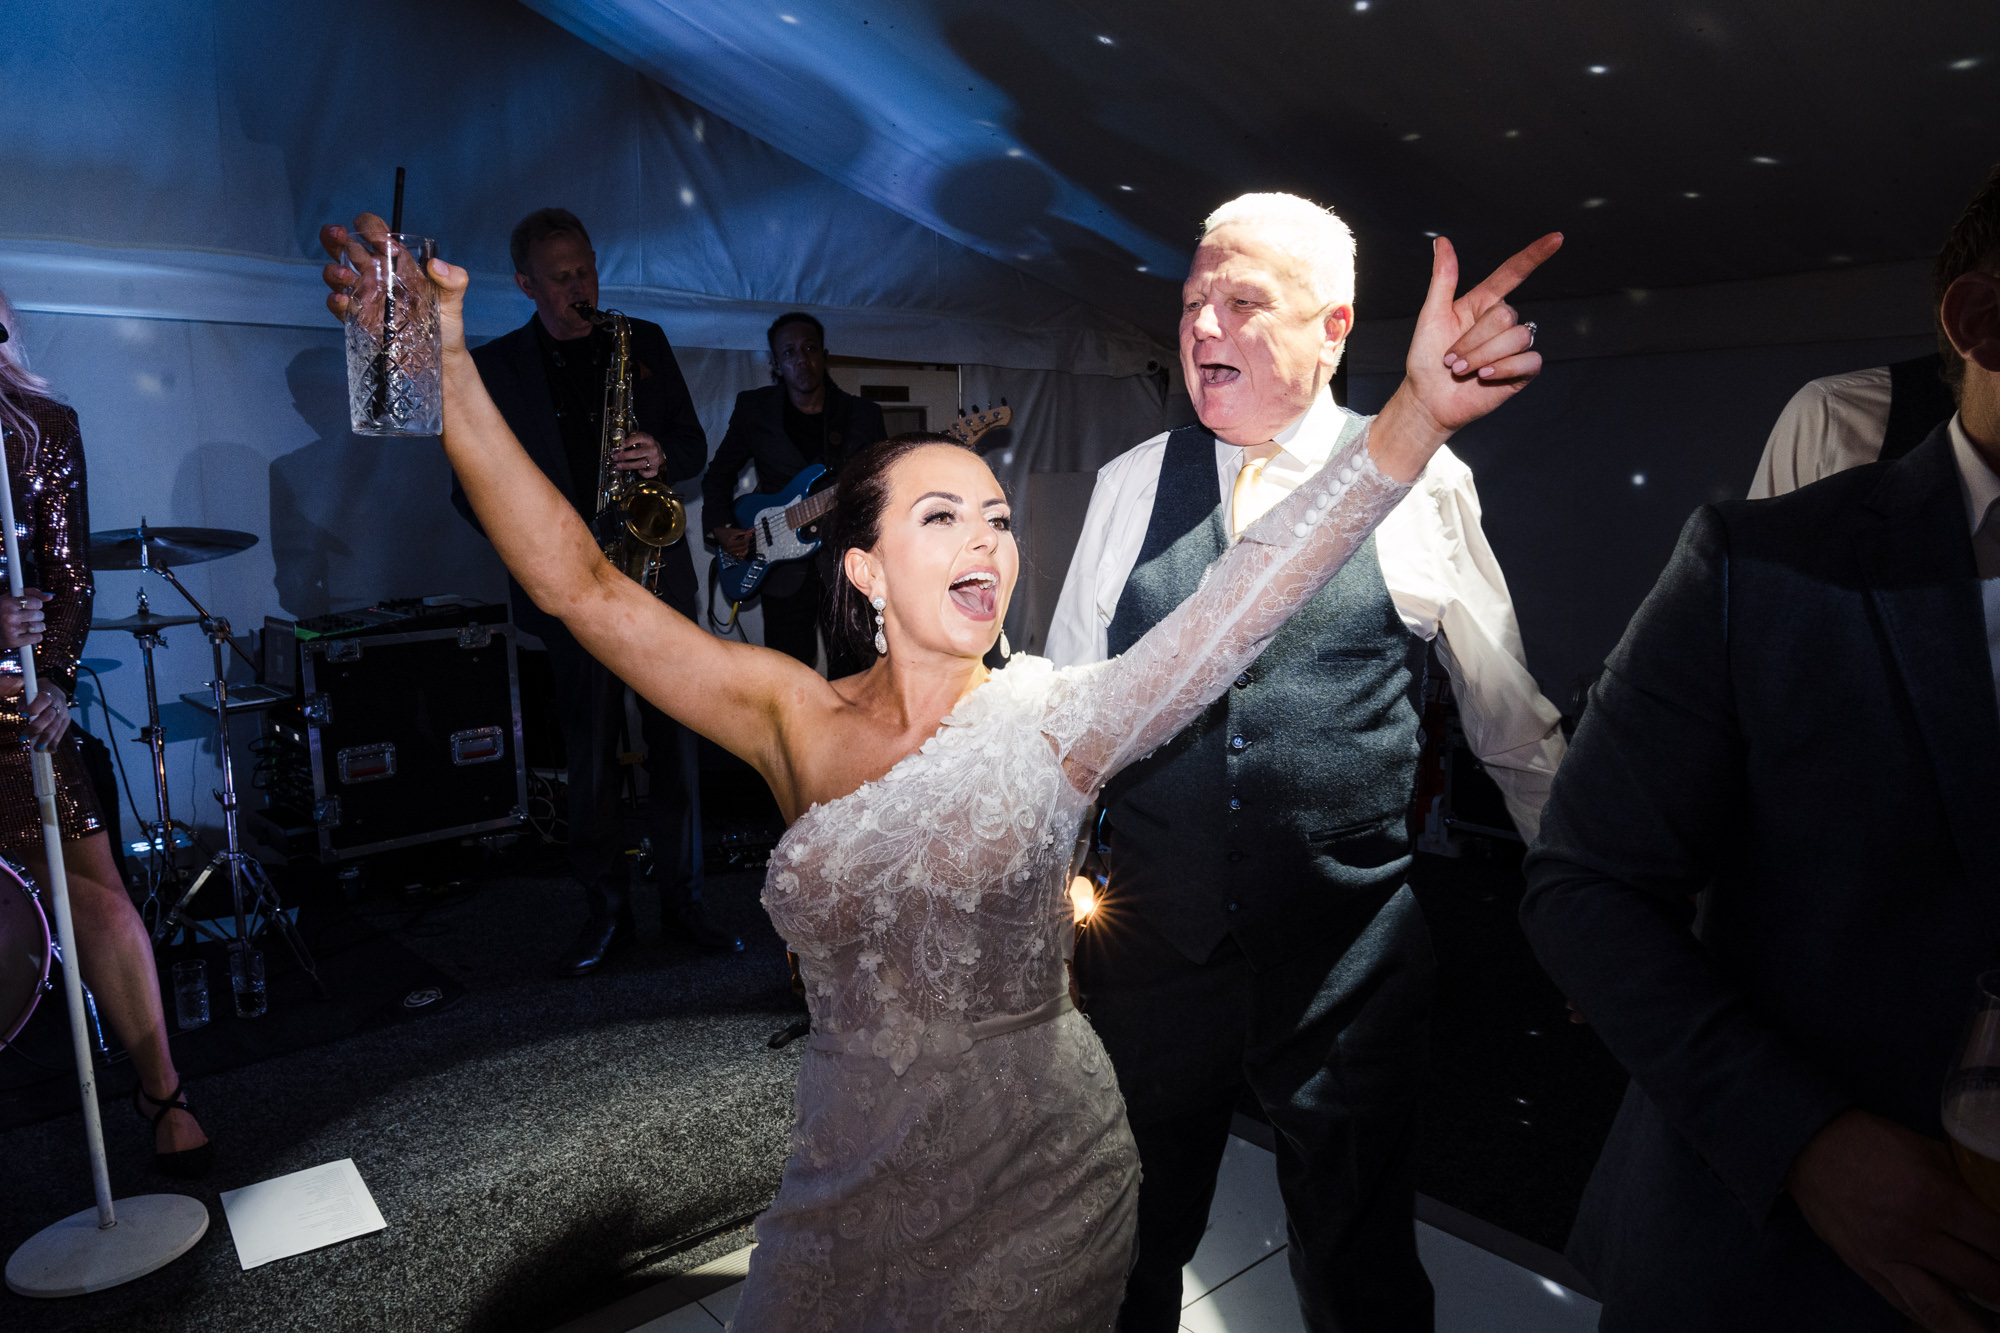 bride dances and throws arms in the air while dancing with her dad at her wedding